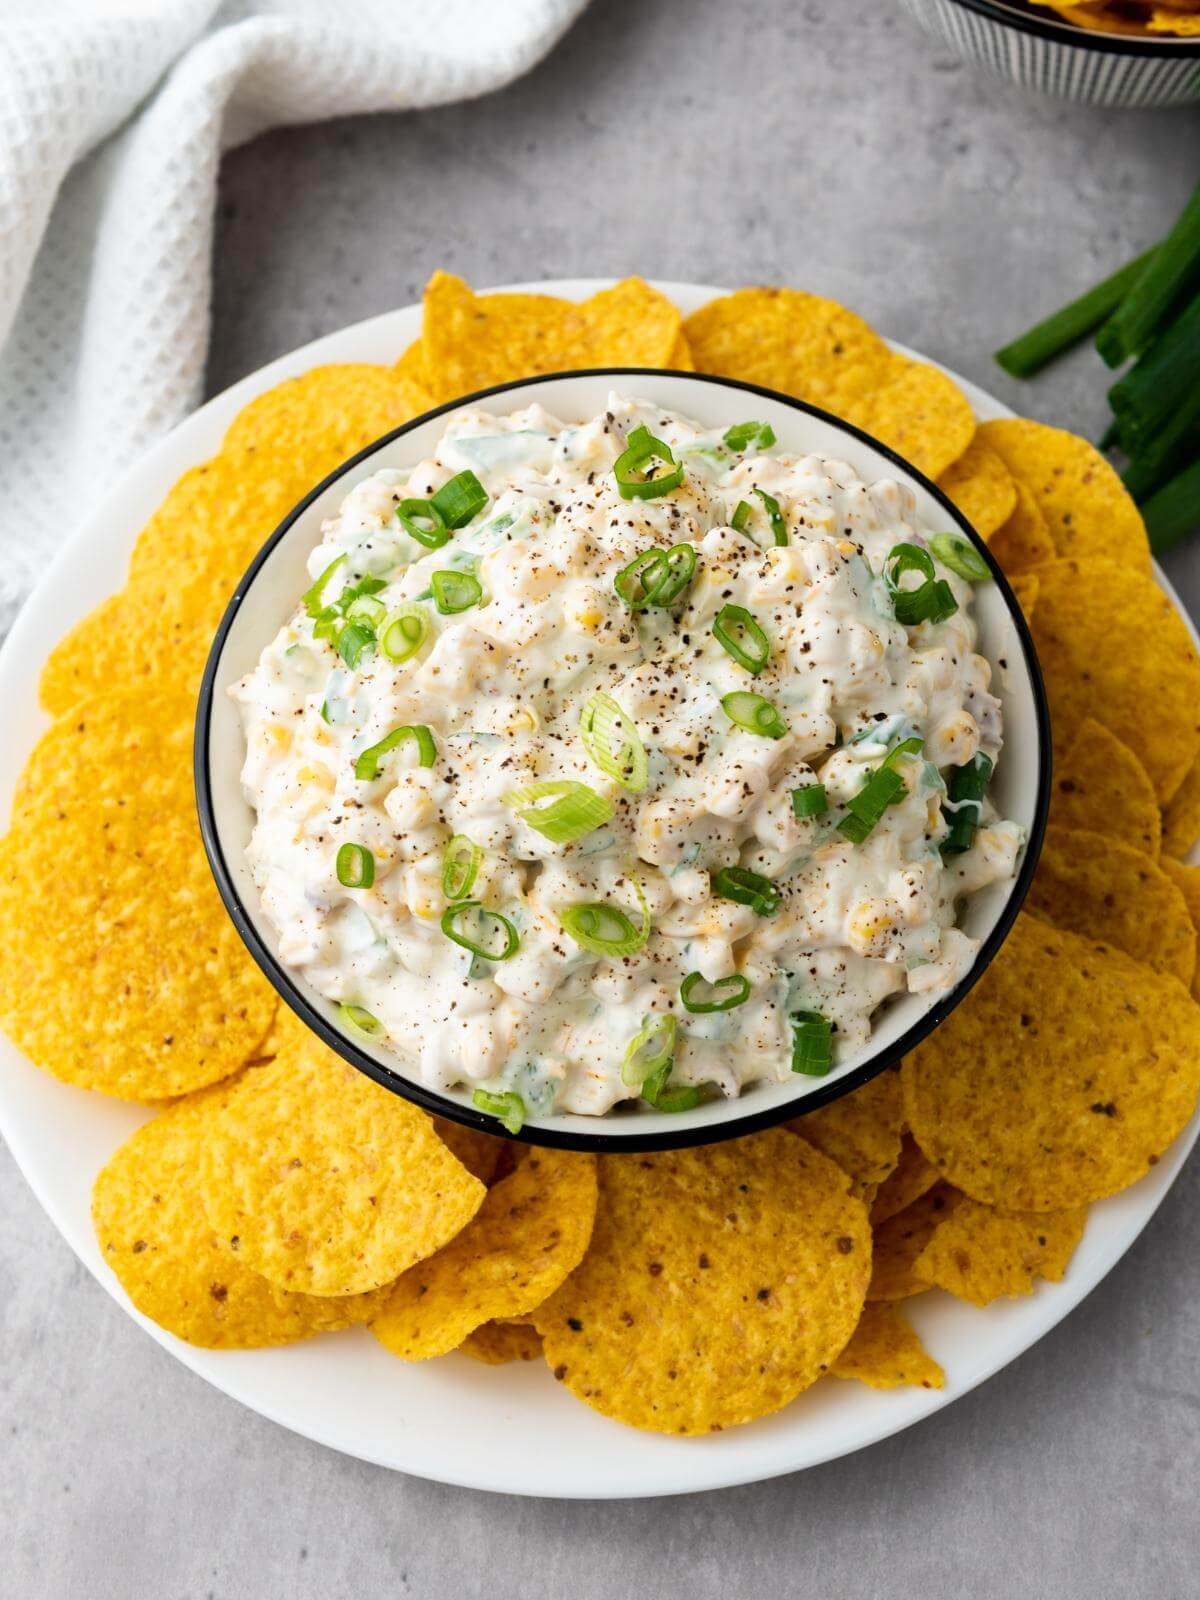 Creamy corn dip in a bowl with tortilla chips.